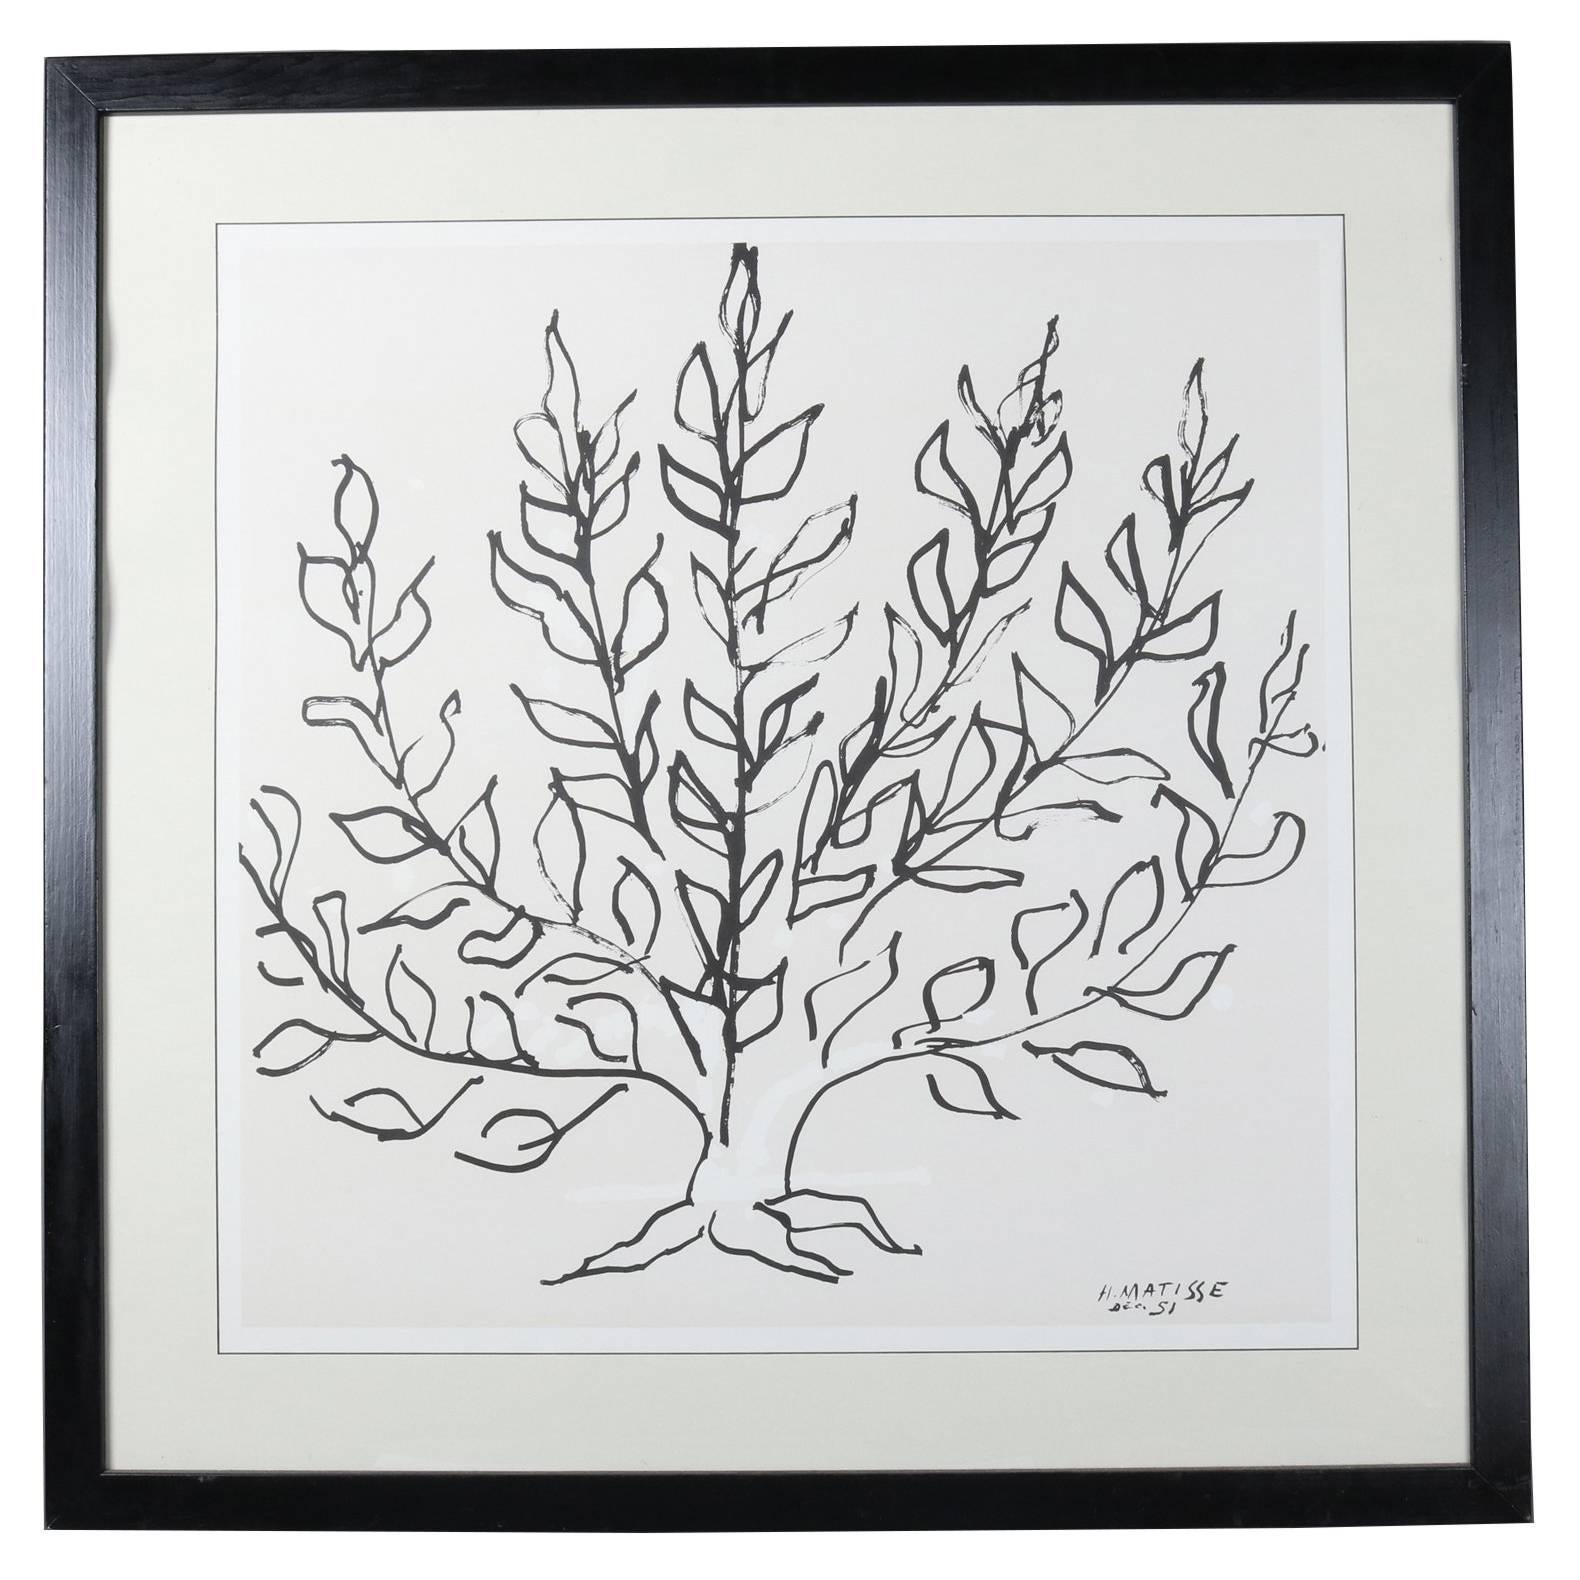 Oversized Mid-Century Modern Classic Print of Henri Matisse's "Le Buisson"